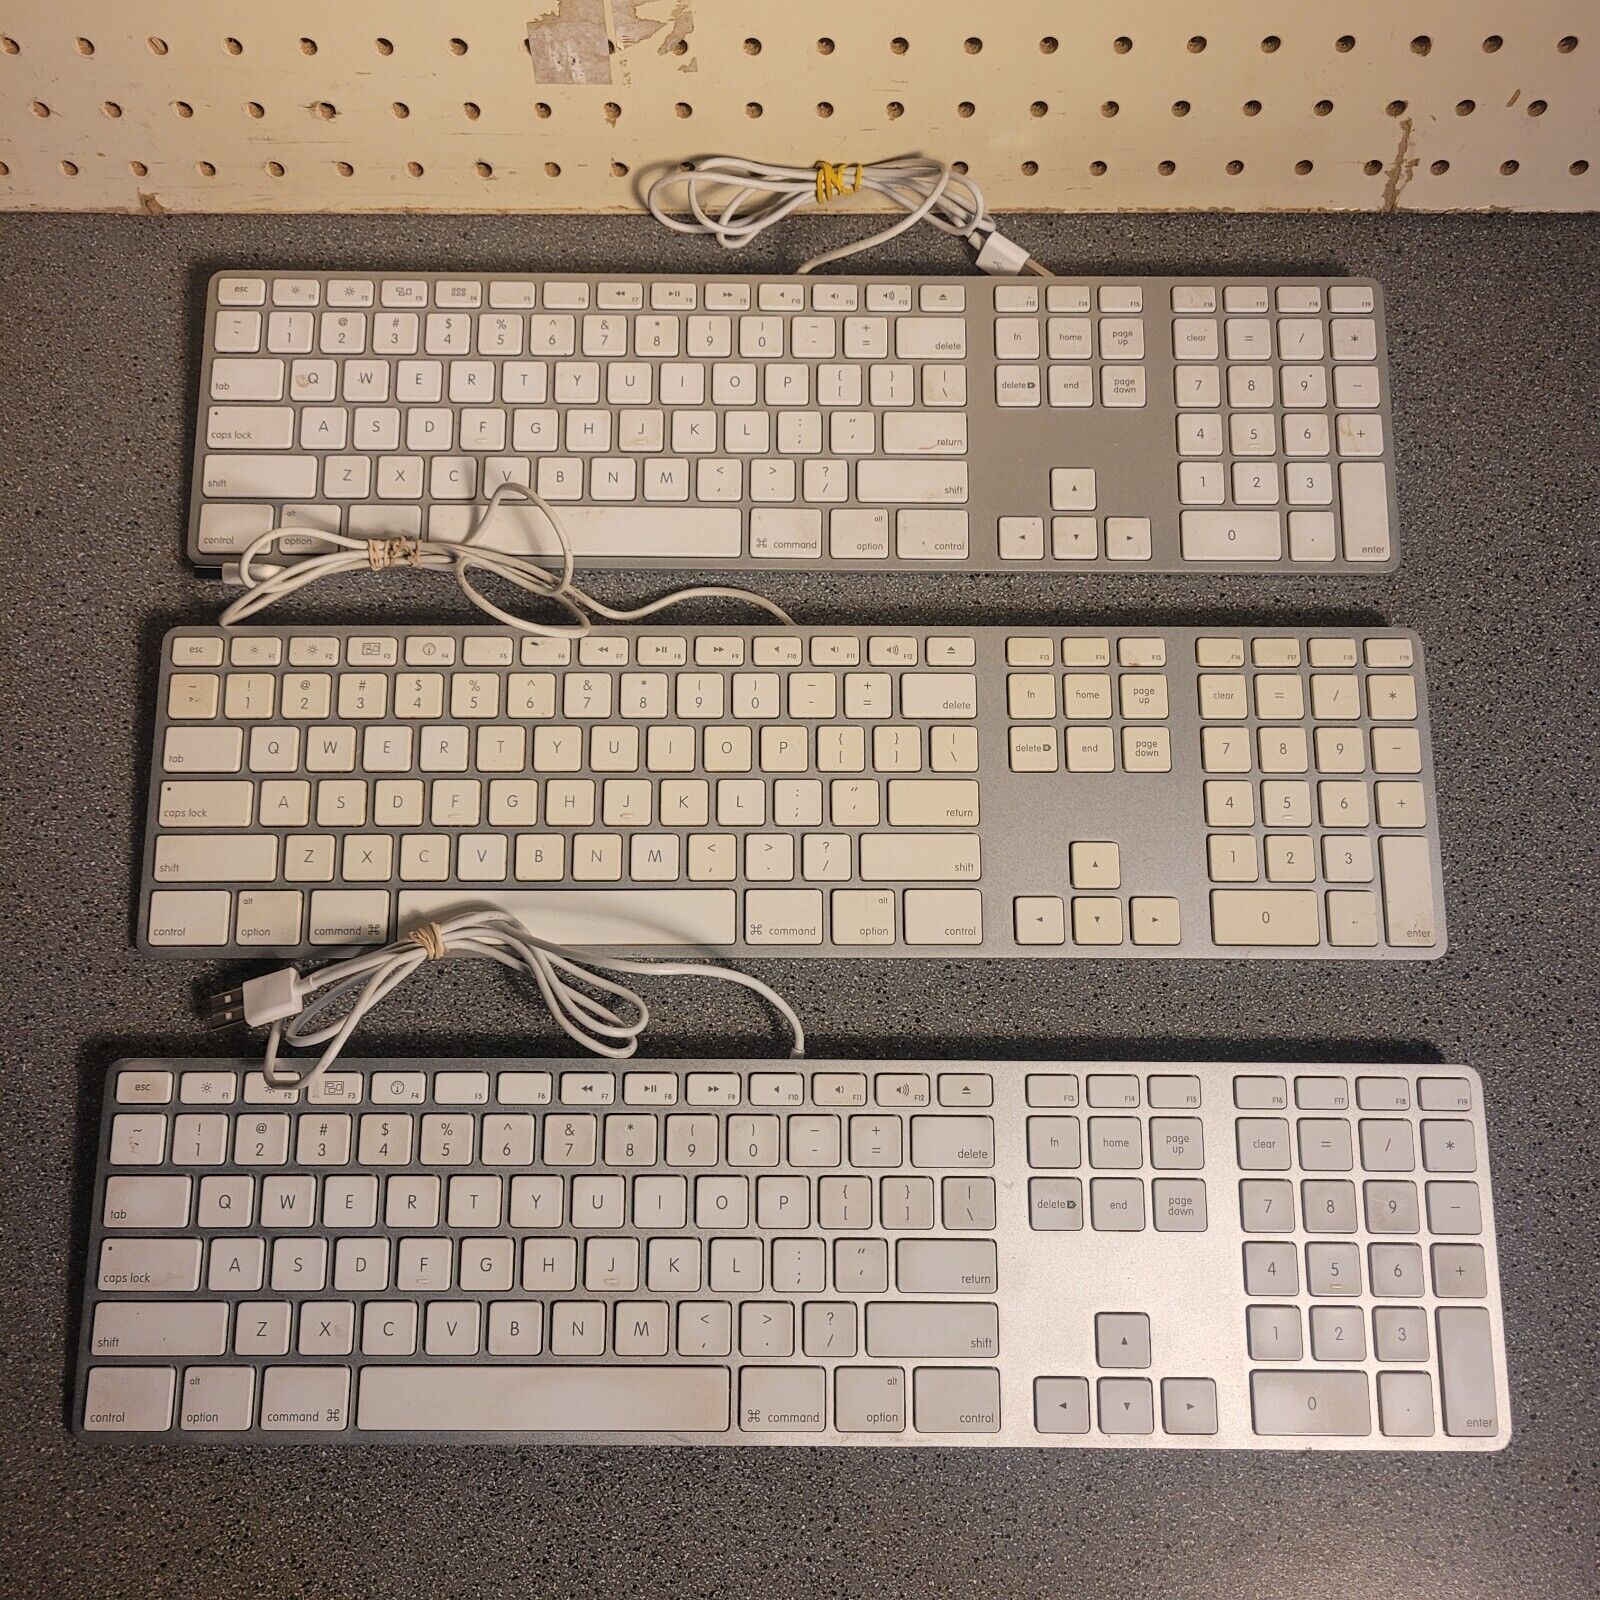 Lot of Three (3) Apple USB Wired Keyboards Model: A1243 Tested and Works Used